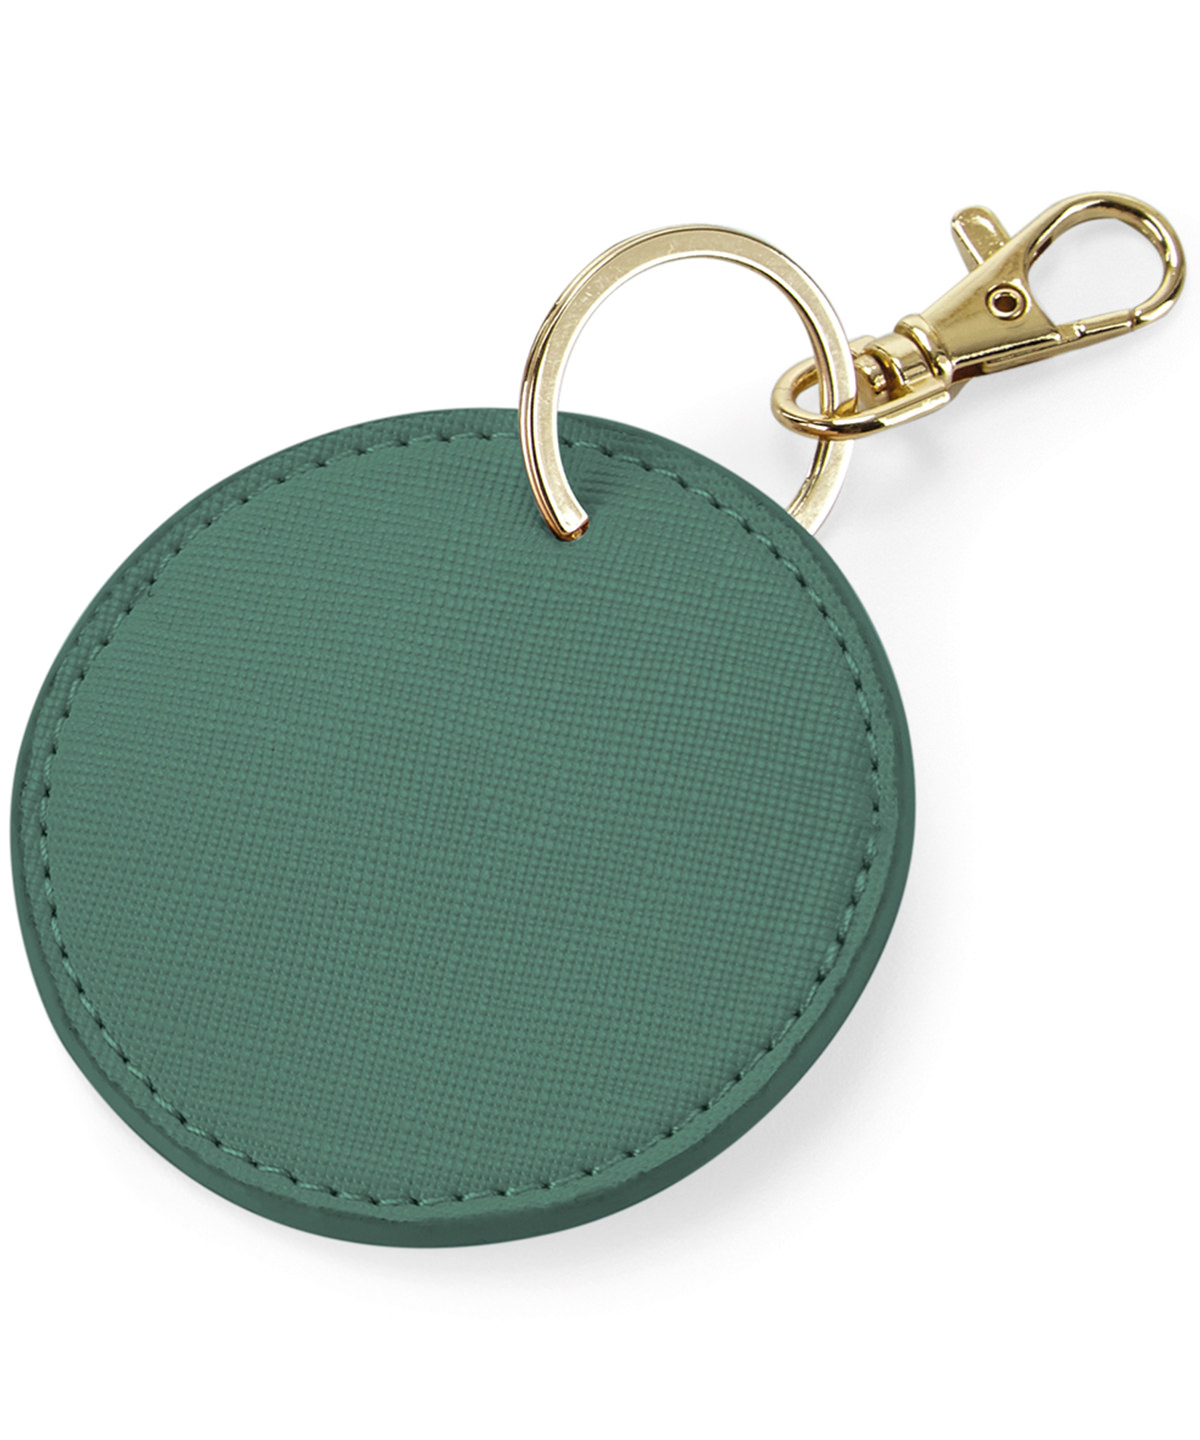 Boutique Circular Keyclip Sage Green Size One Size